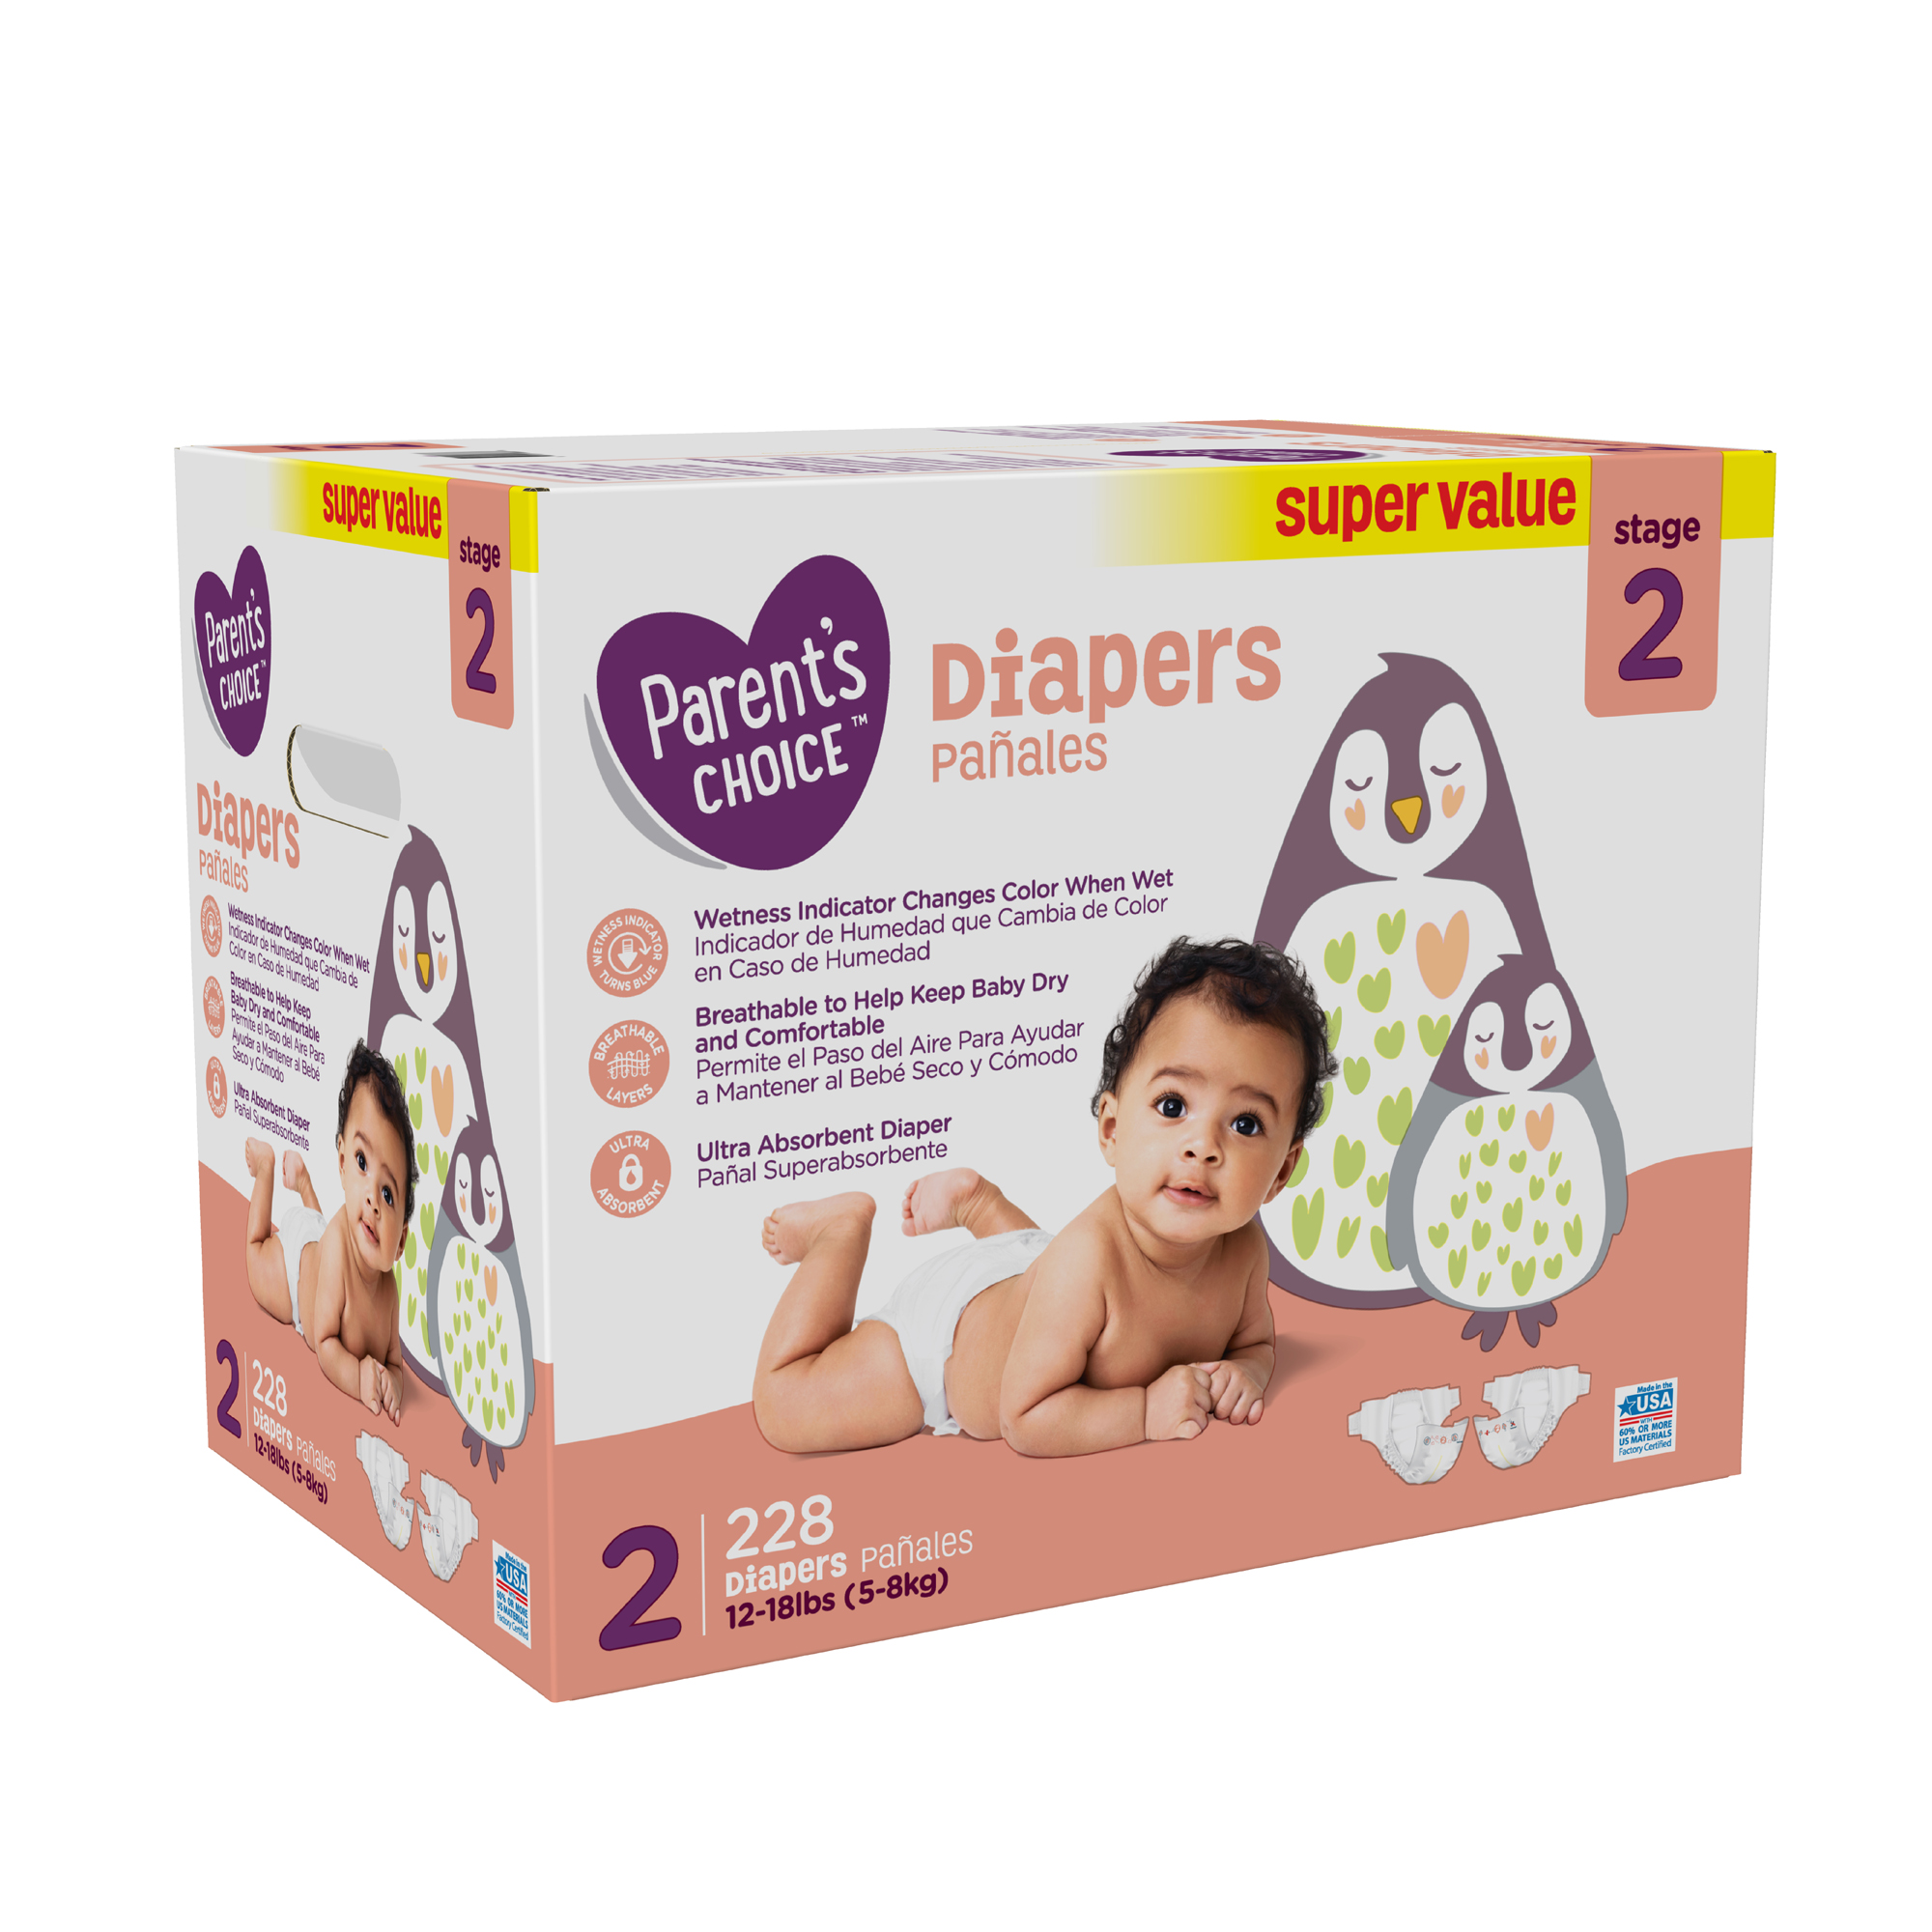 Parents Choice Diapers size 5 reviews in Diapers - Disposable Diapers -  ChickAdvisor (page 2)